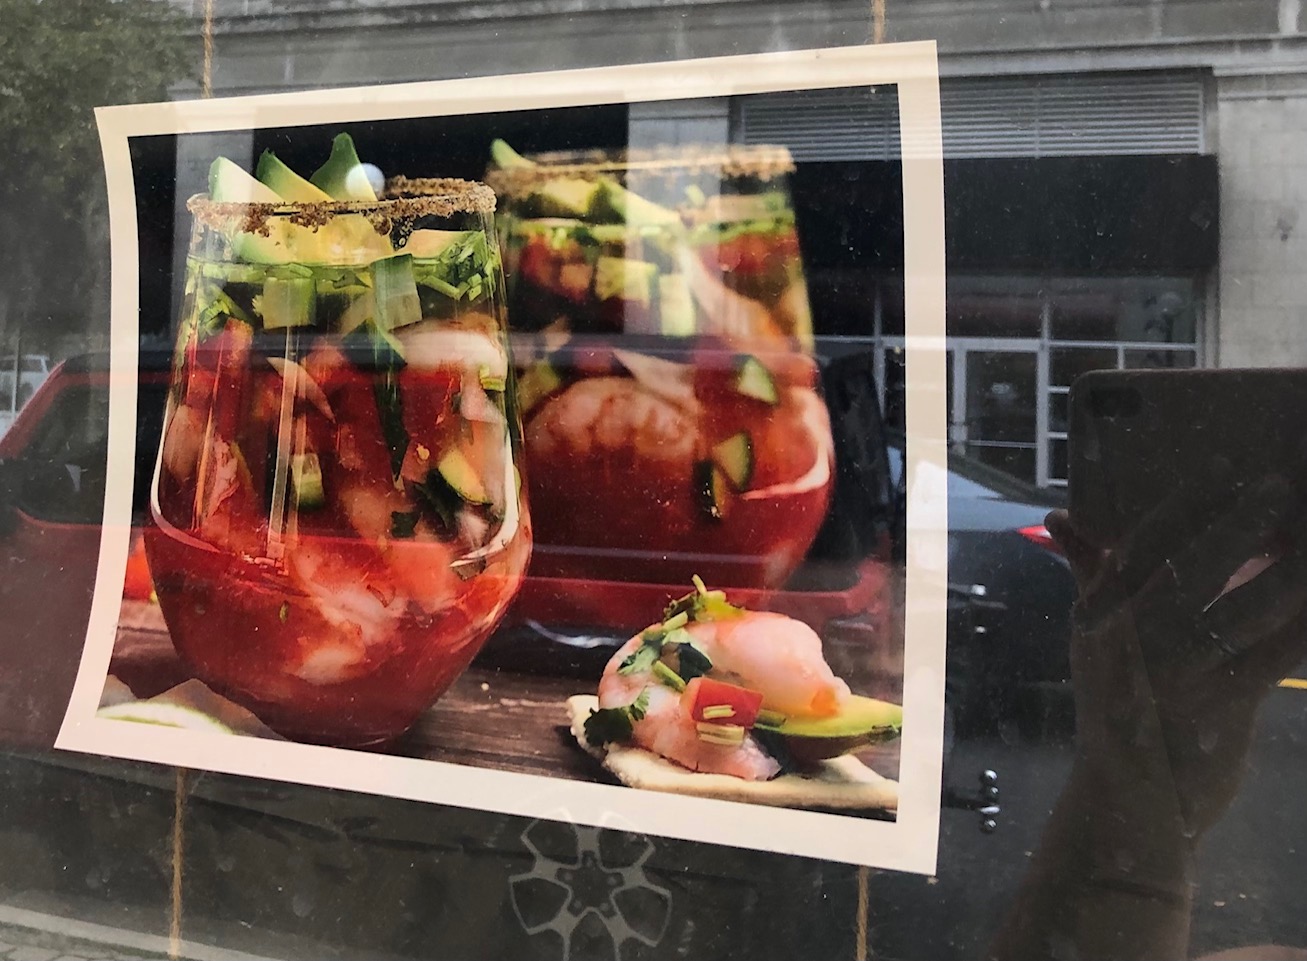 On a color print out of a photo, there are two large wine glasses full of a red liquid with seafood and cucumber. Photo by Alyssa Buckley.